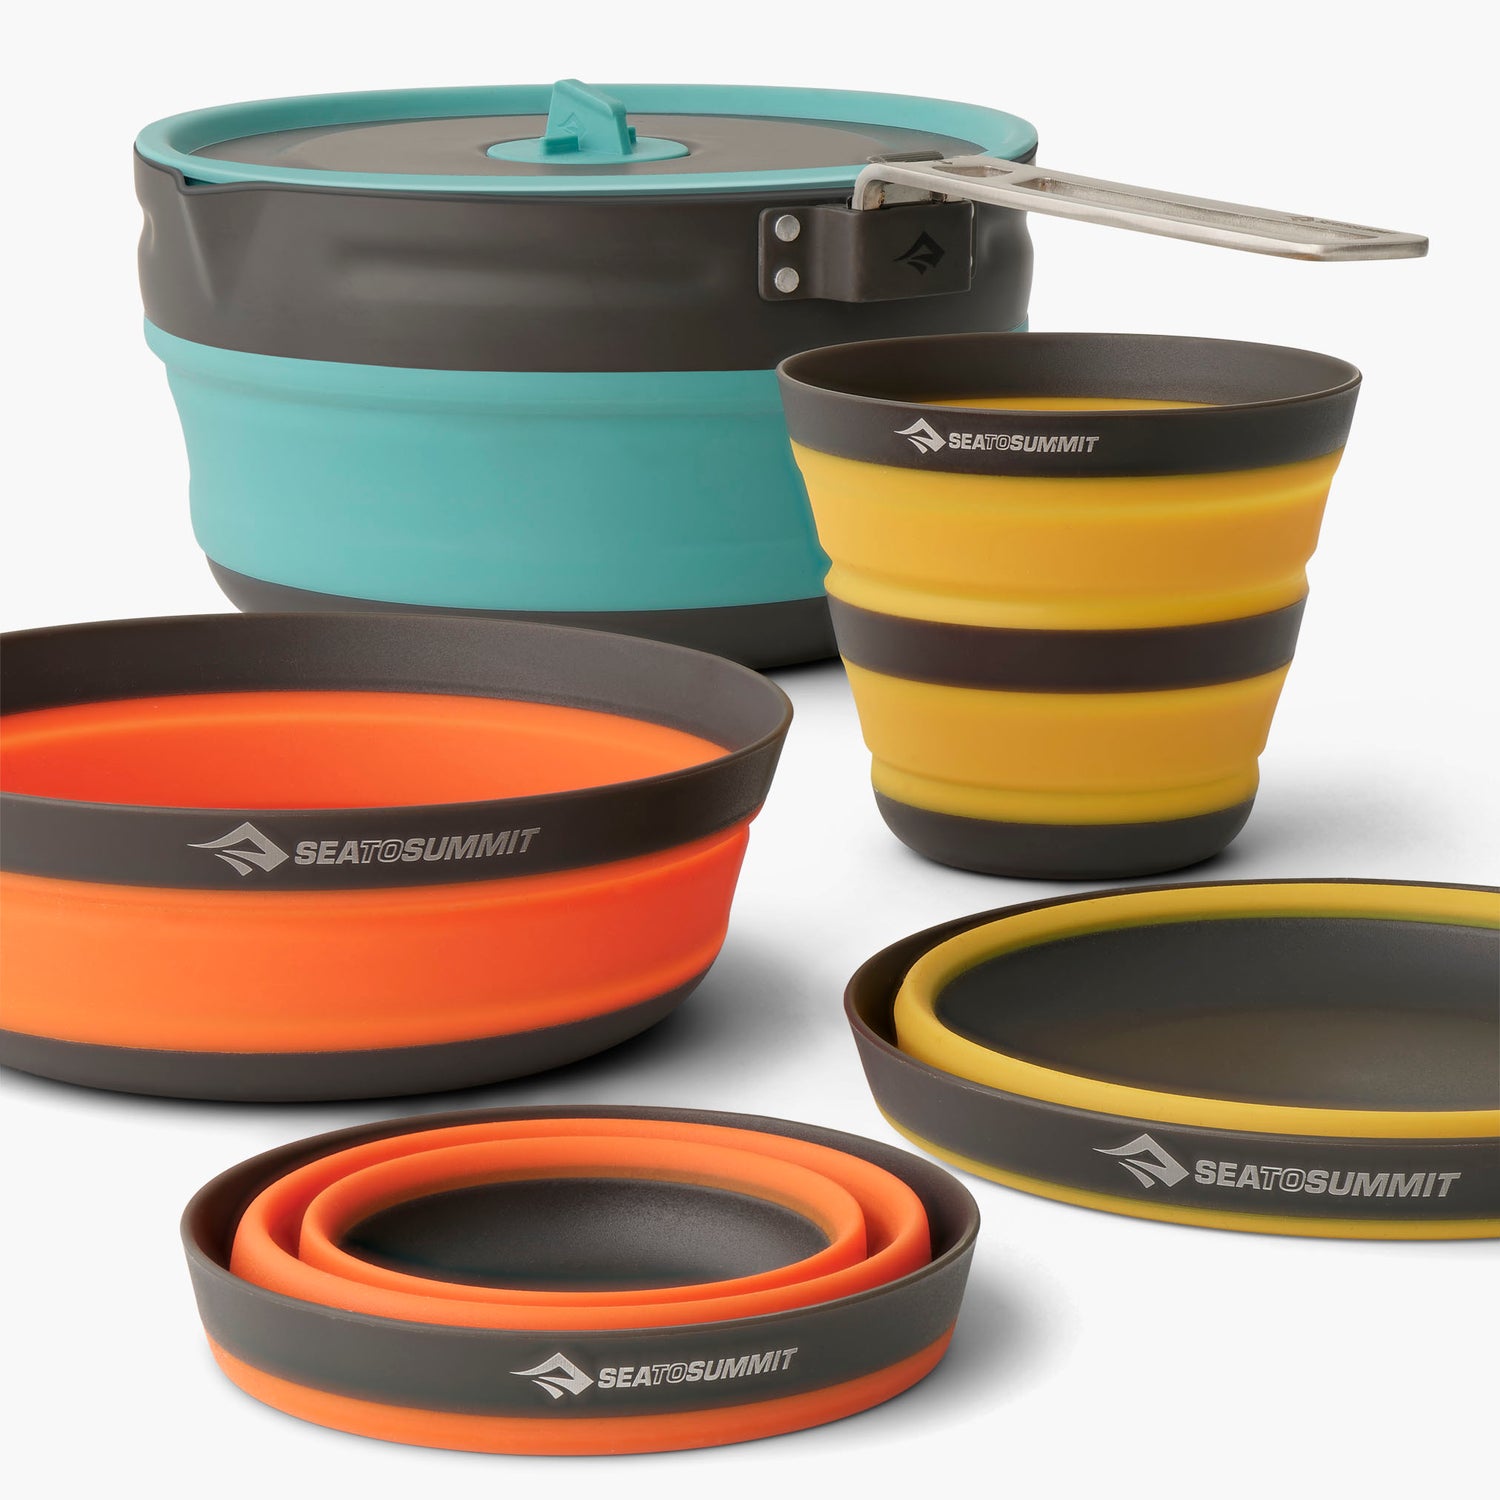 Sea To Summit Frontier UL Collapsible One Pot Cook Set w/ 2.2L Pot - 2P 5 Piece